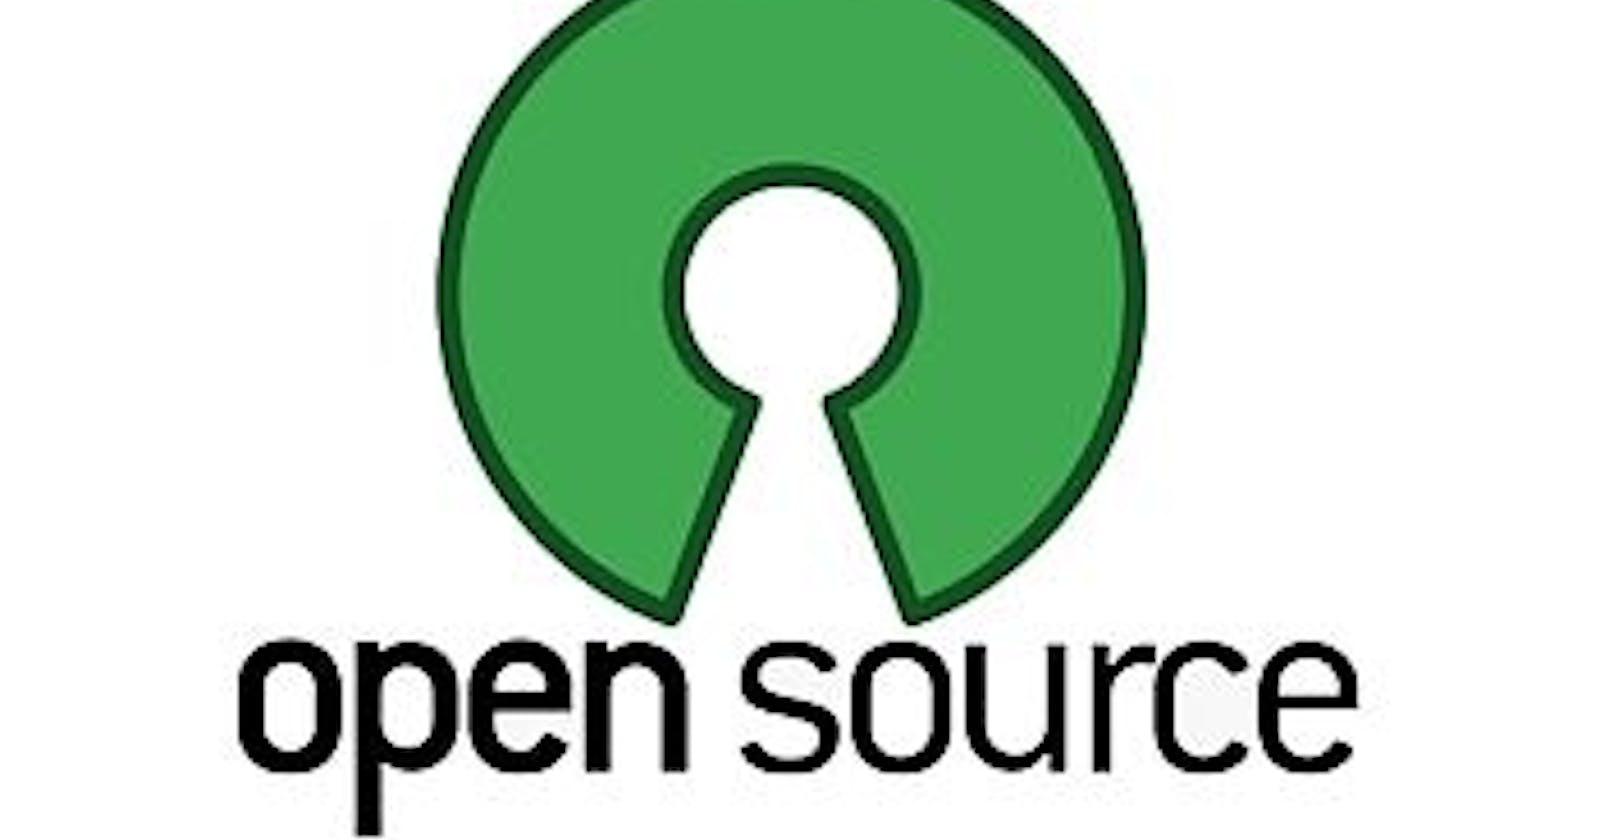 My first contribution to open source has been merged !